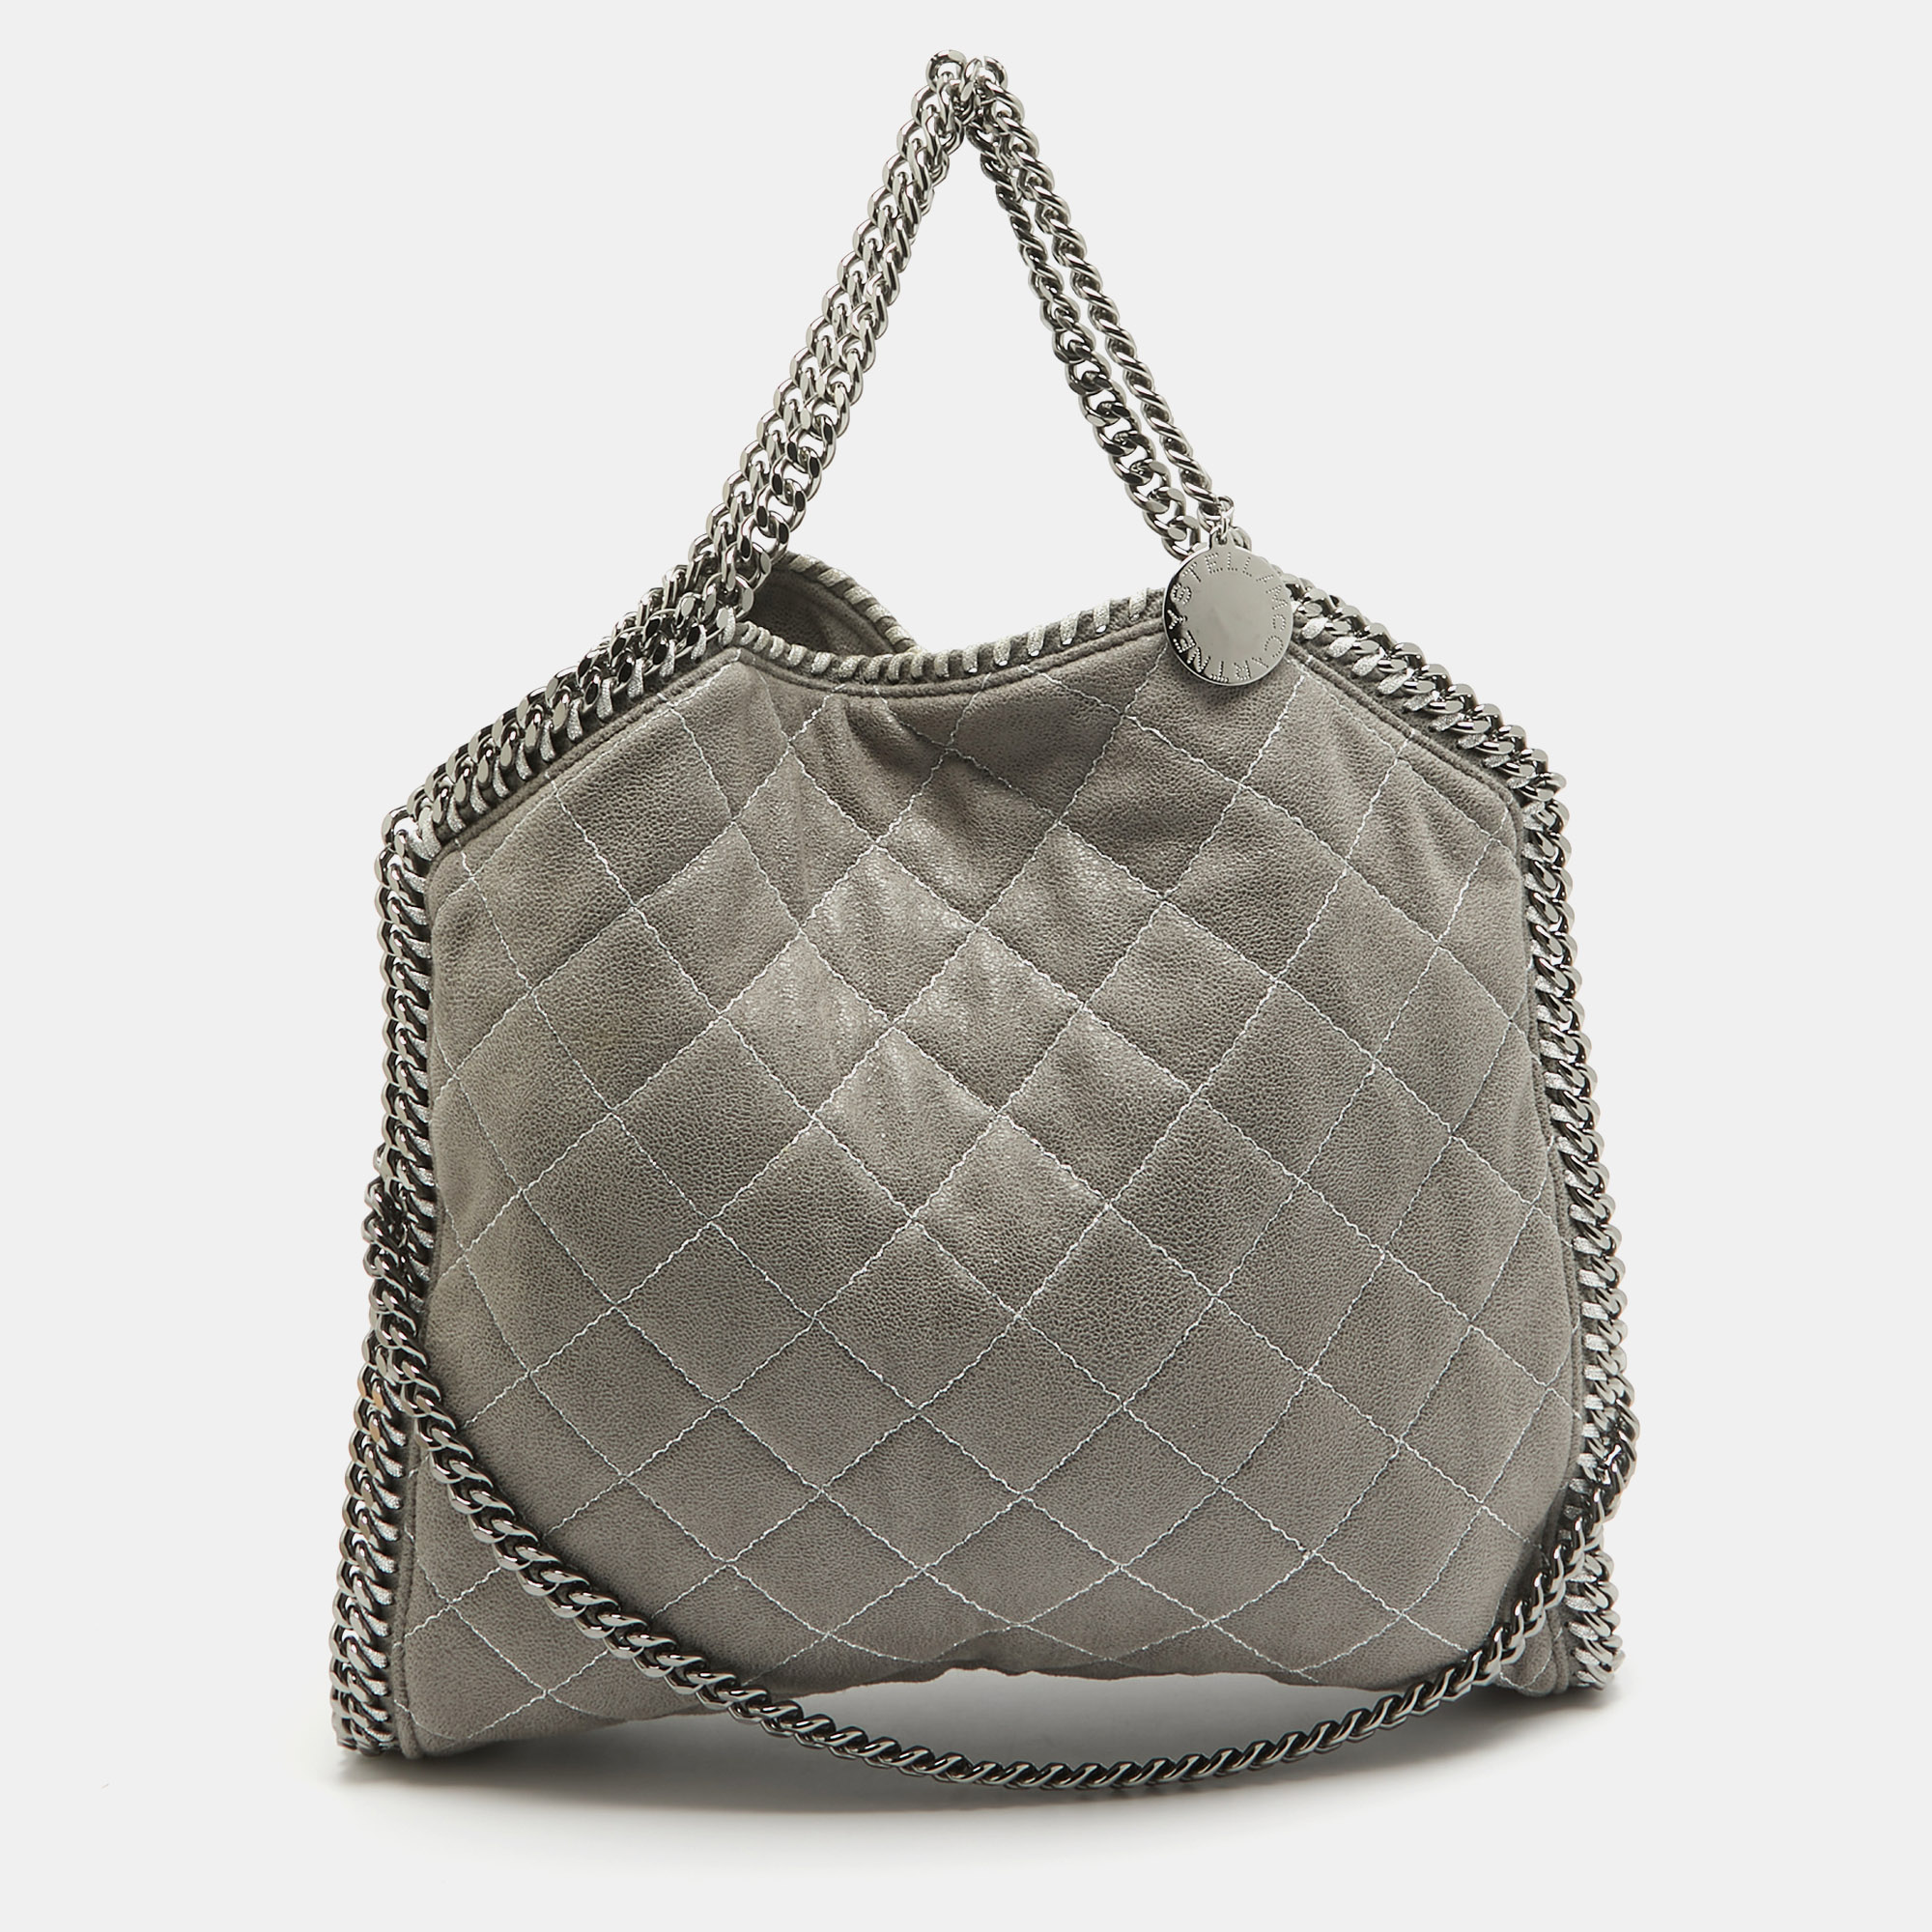 Stella mccartney grey quilted faux suede falabella tote